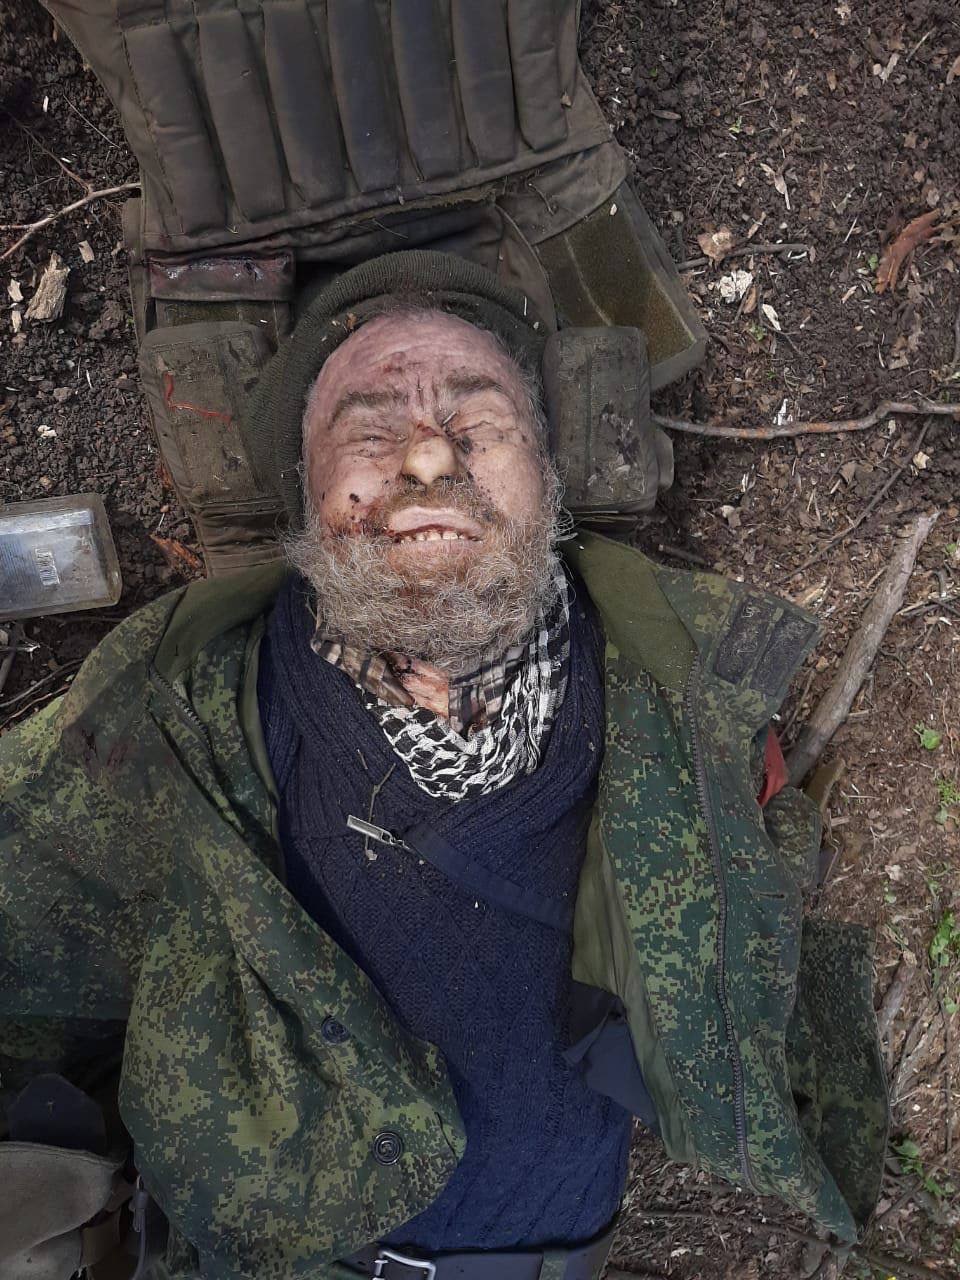 The corpse of a Russian soldier. Probably a DPR militia